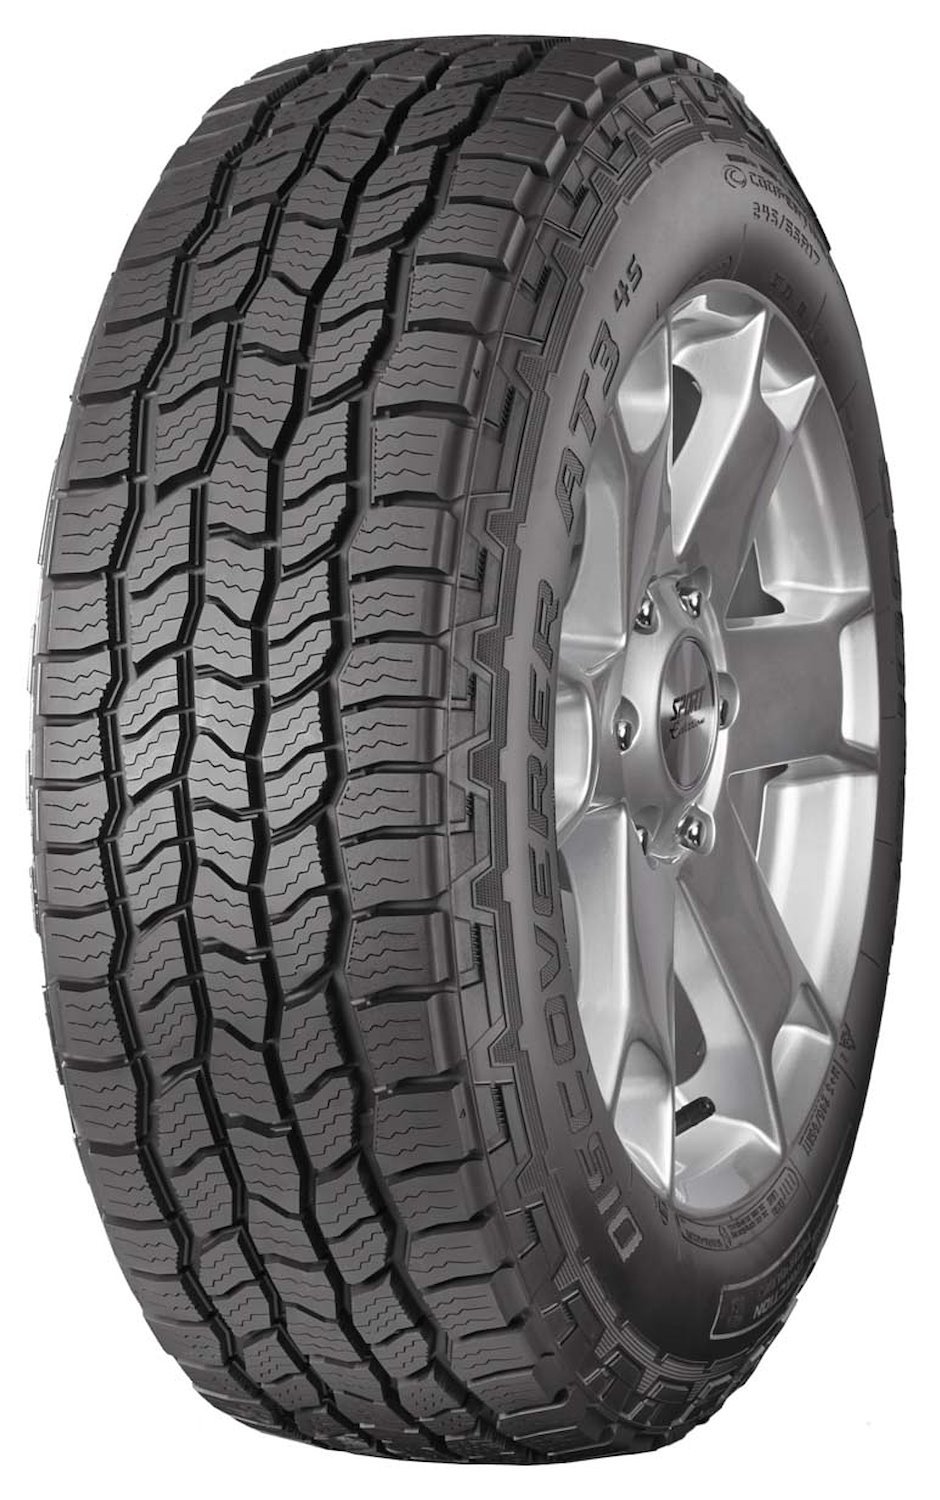 Discoverer AT3 4S All-Terrain Tire, 235/70R16